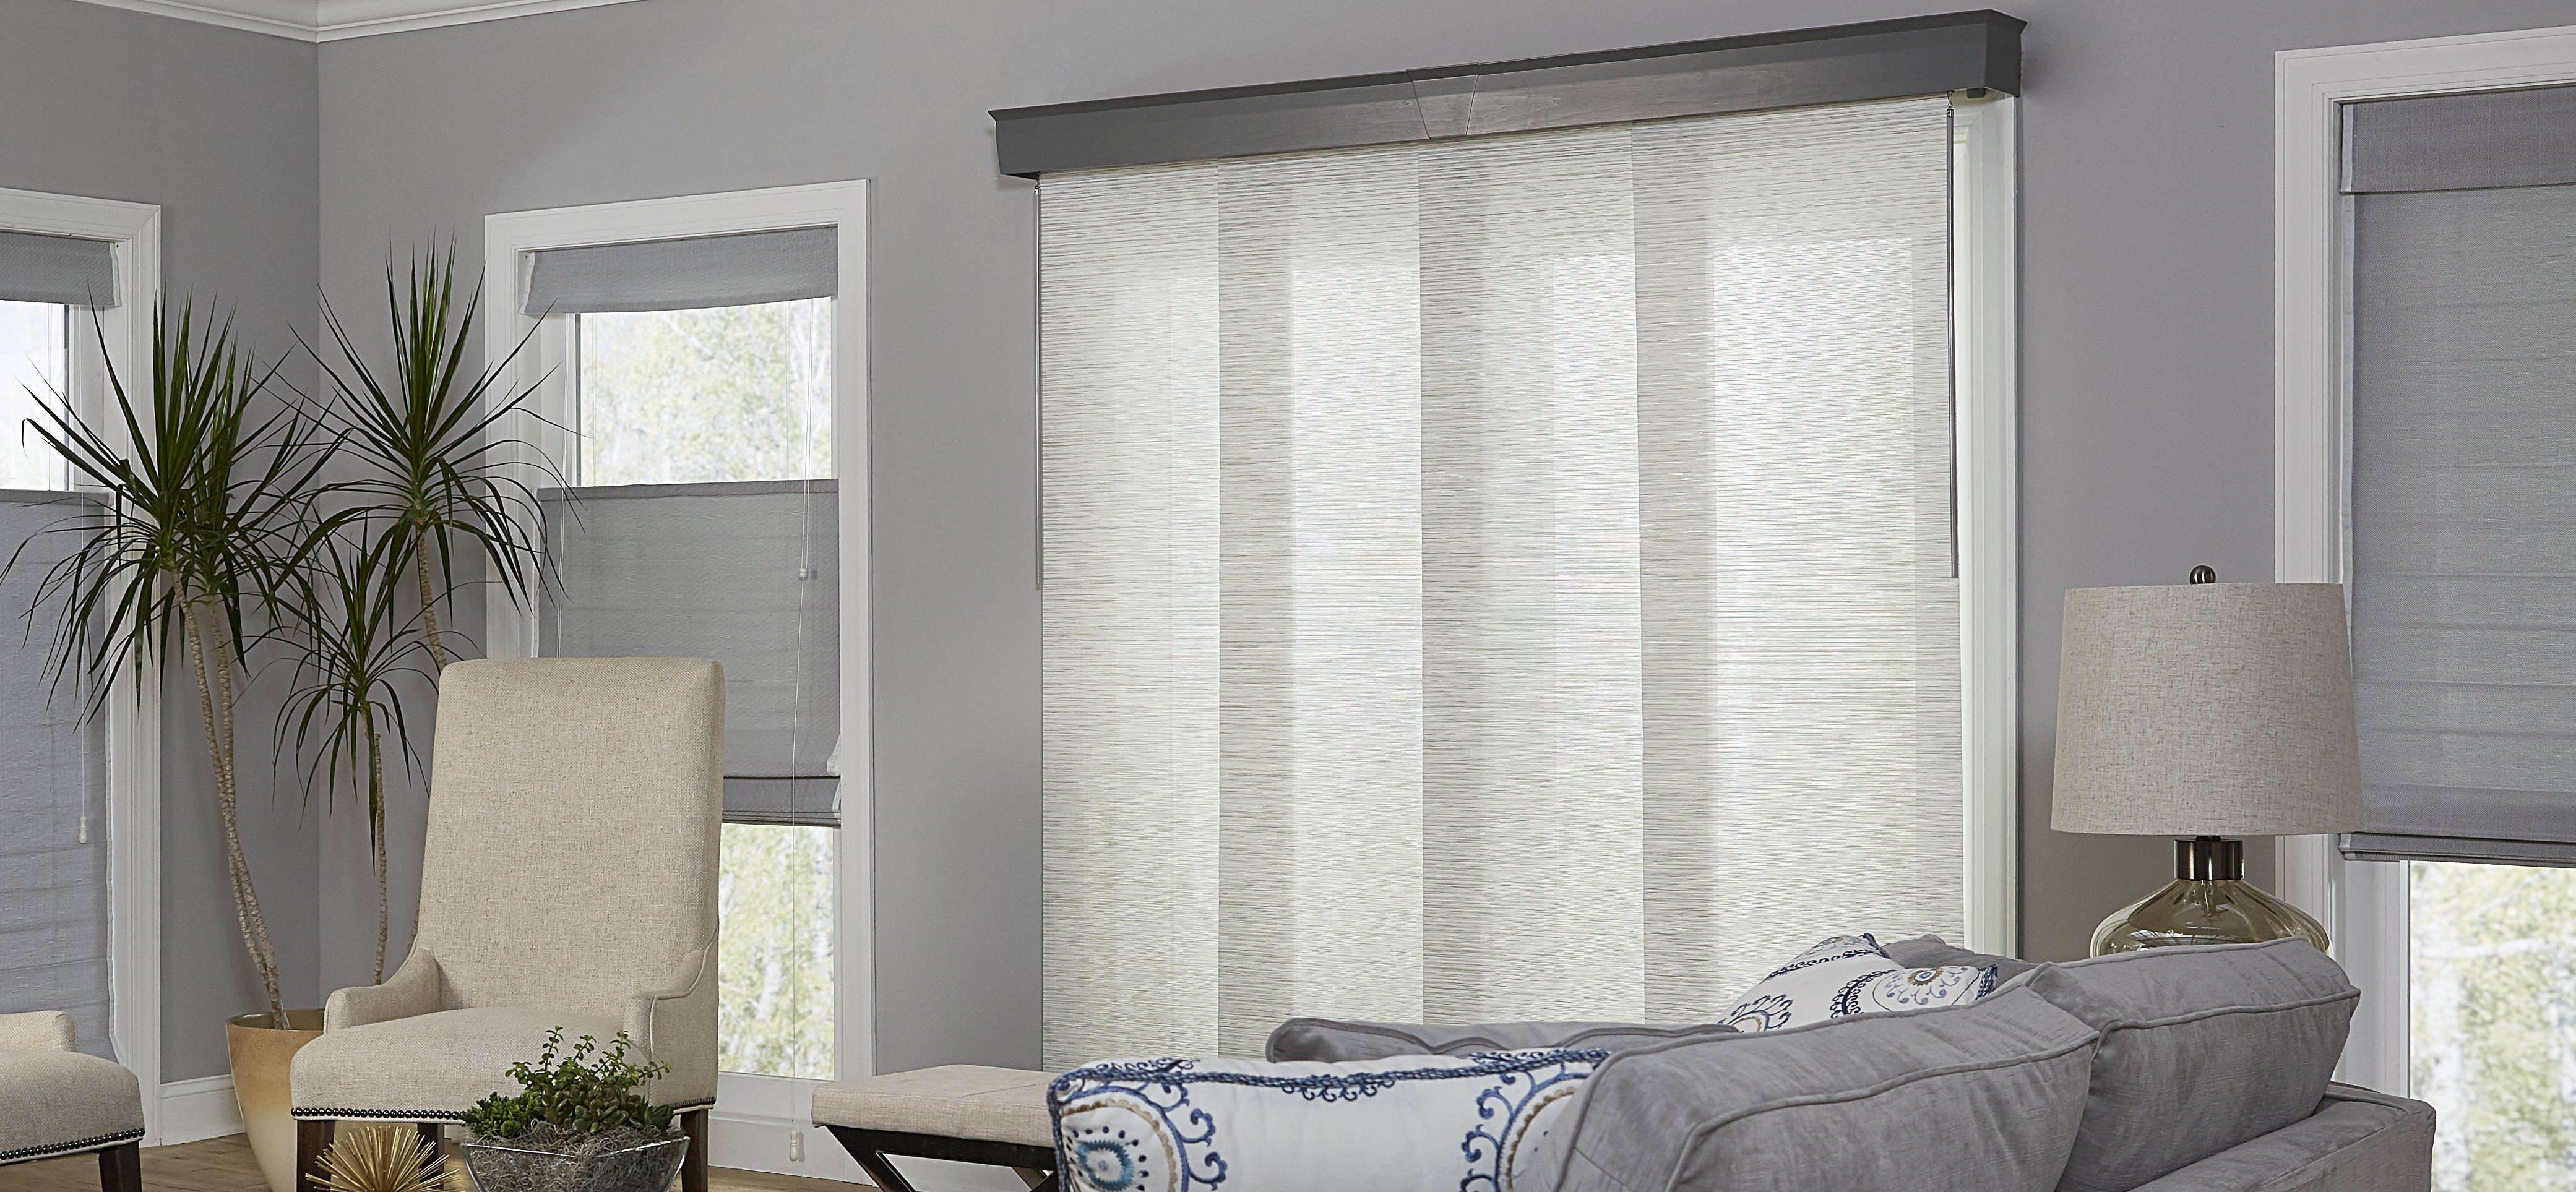 Elegant Curtains for Sliding Glass Doors with Vertical Blinds